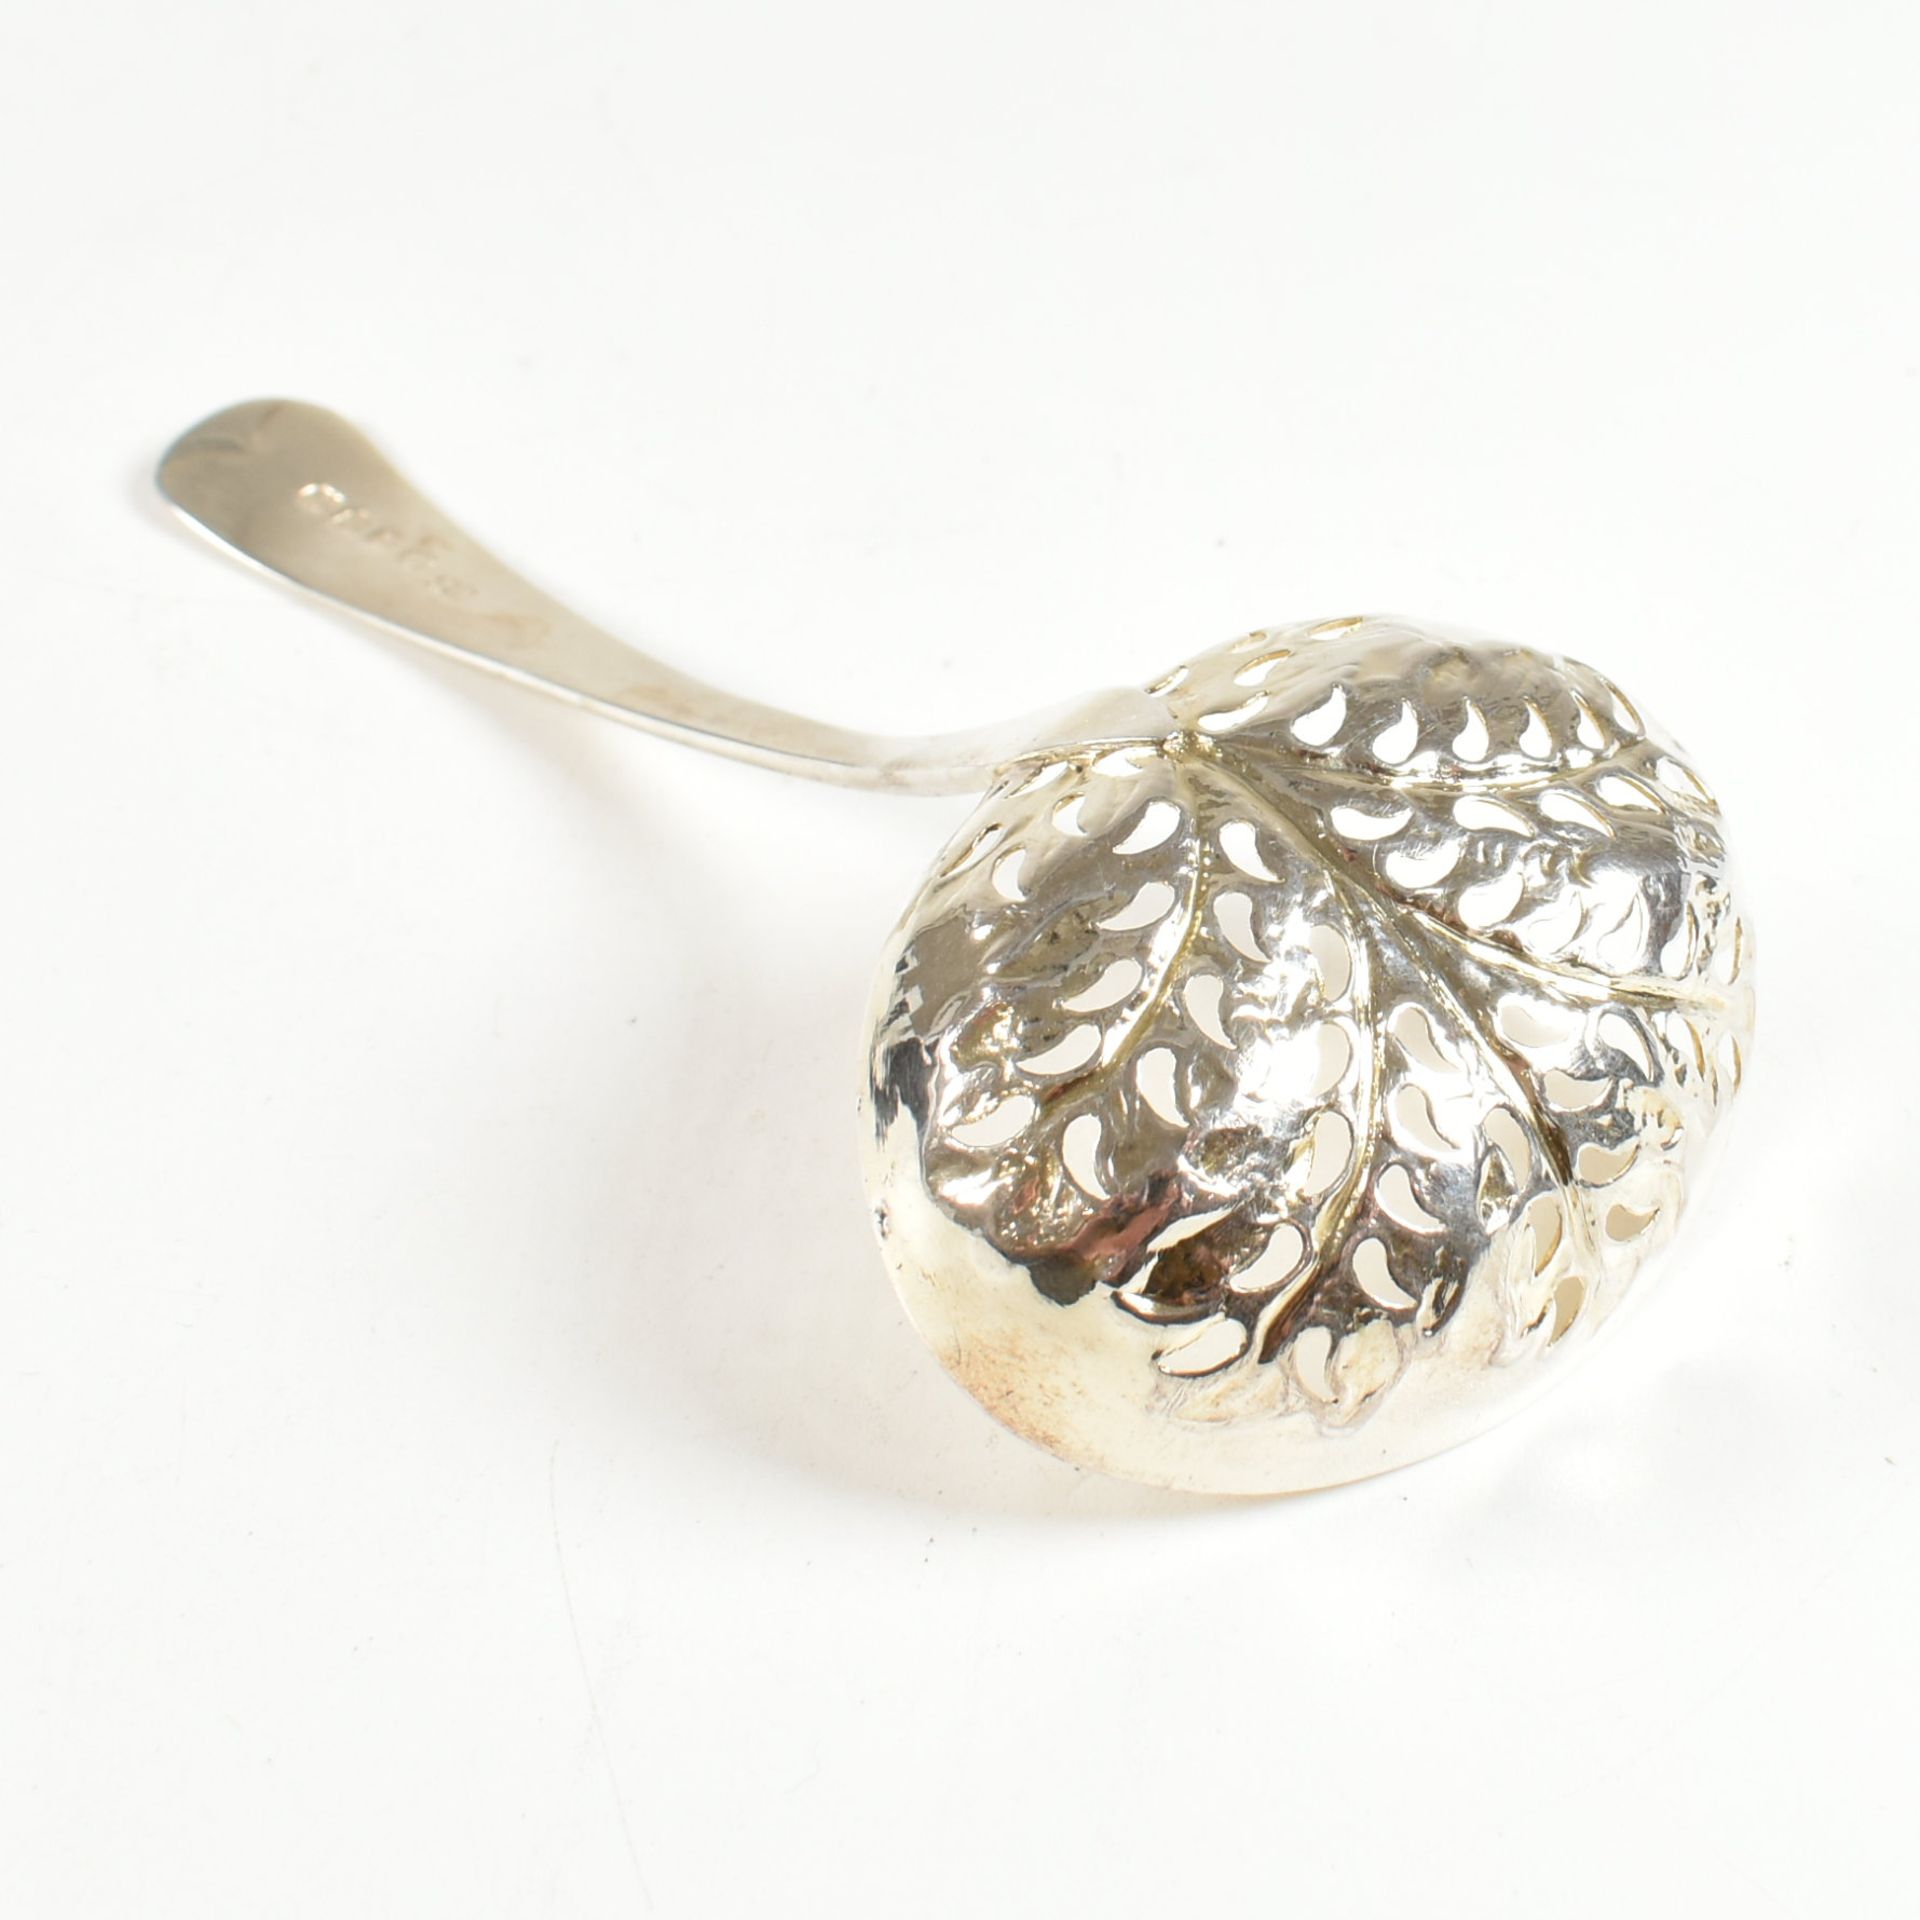 CASED GEORGE II HALLMARKED SILVER SUGAR SIFTER SPOON - Image 9 of 12